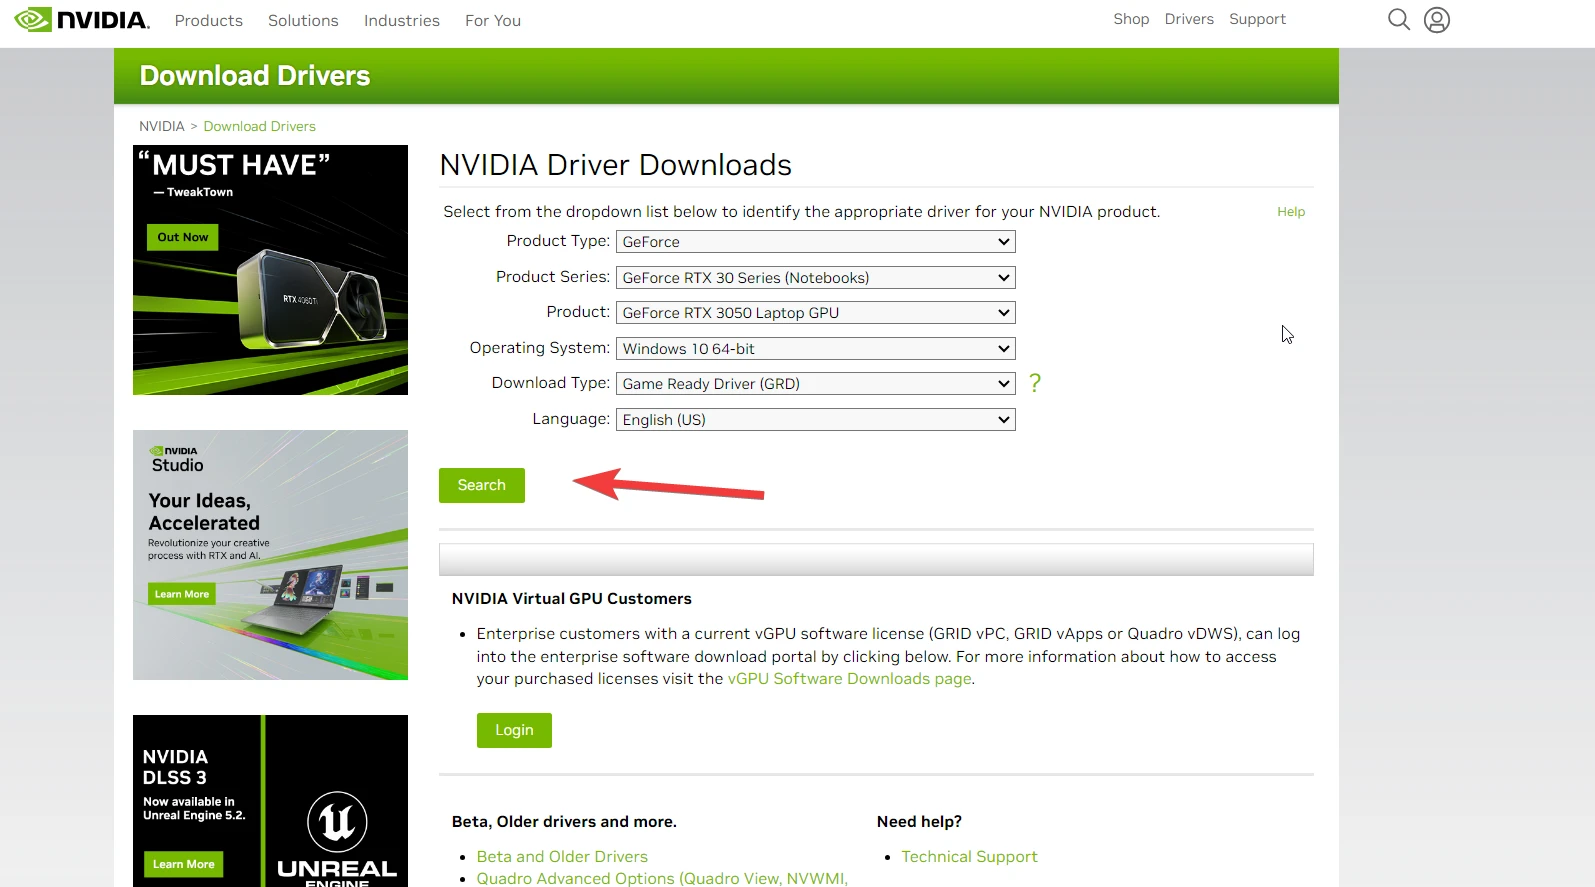 NVIDIA Driver Download Page